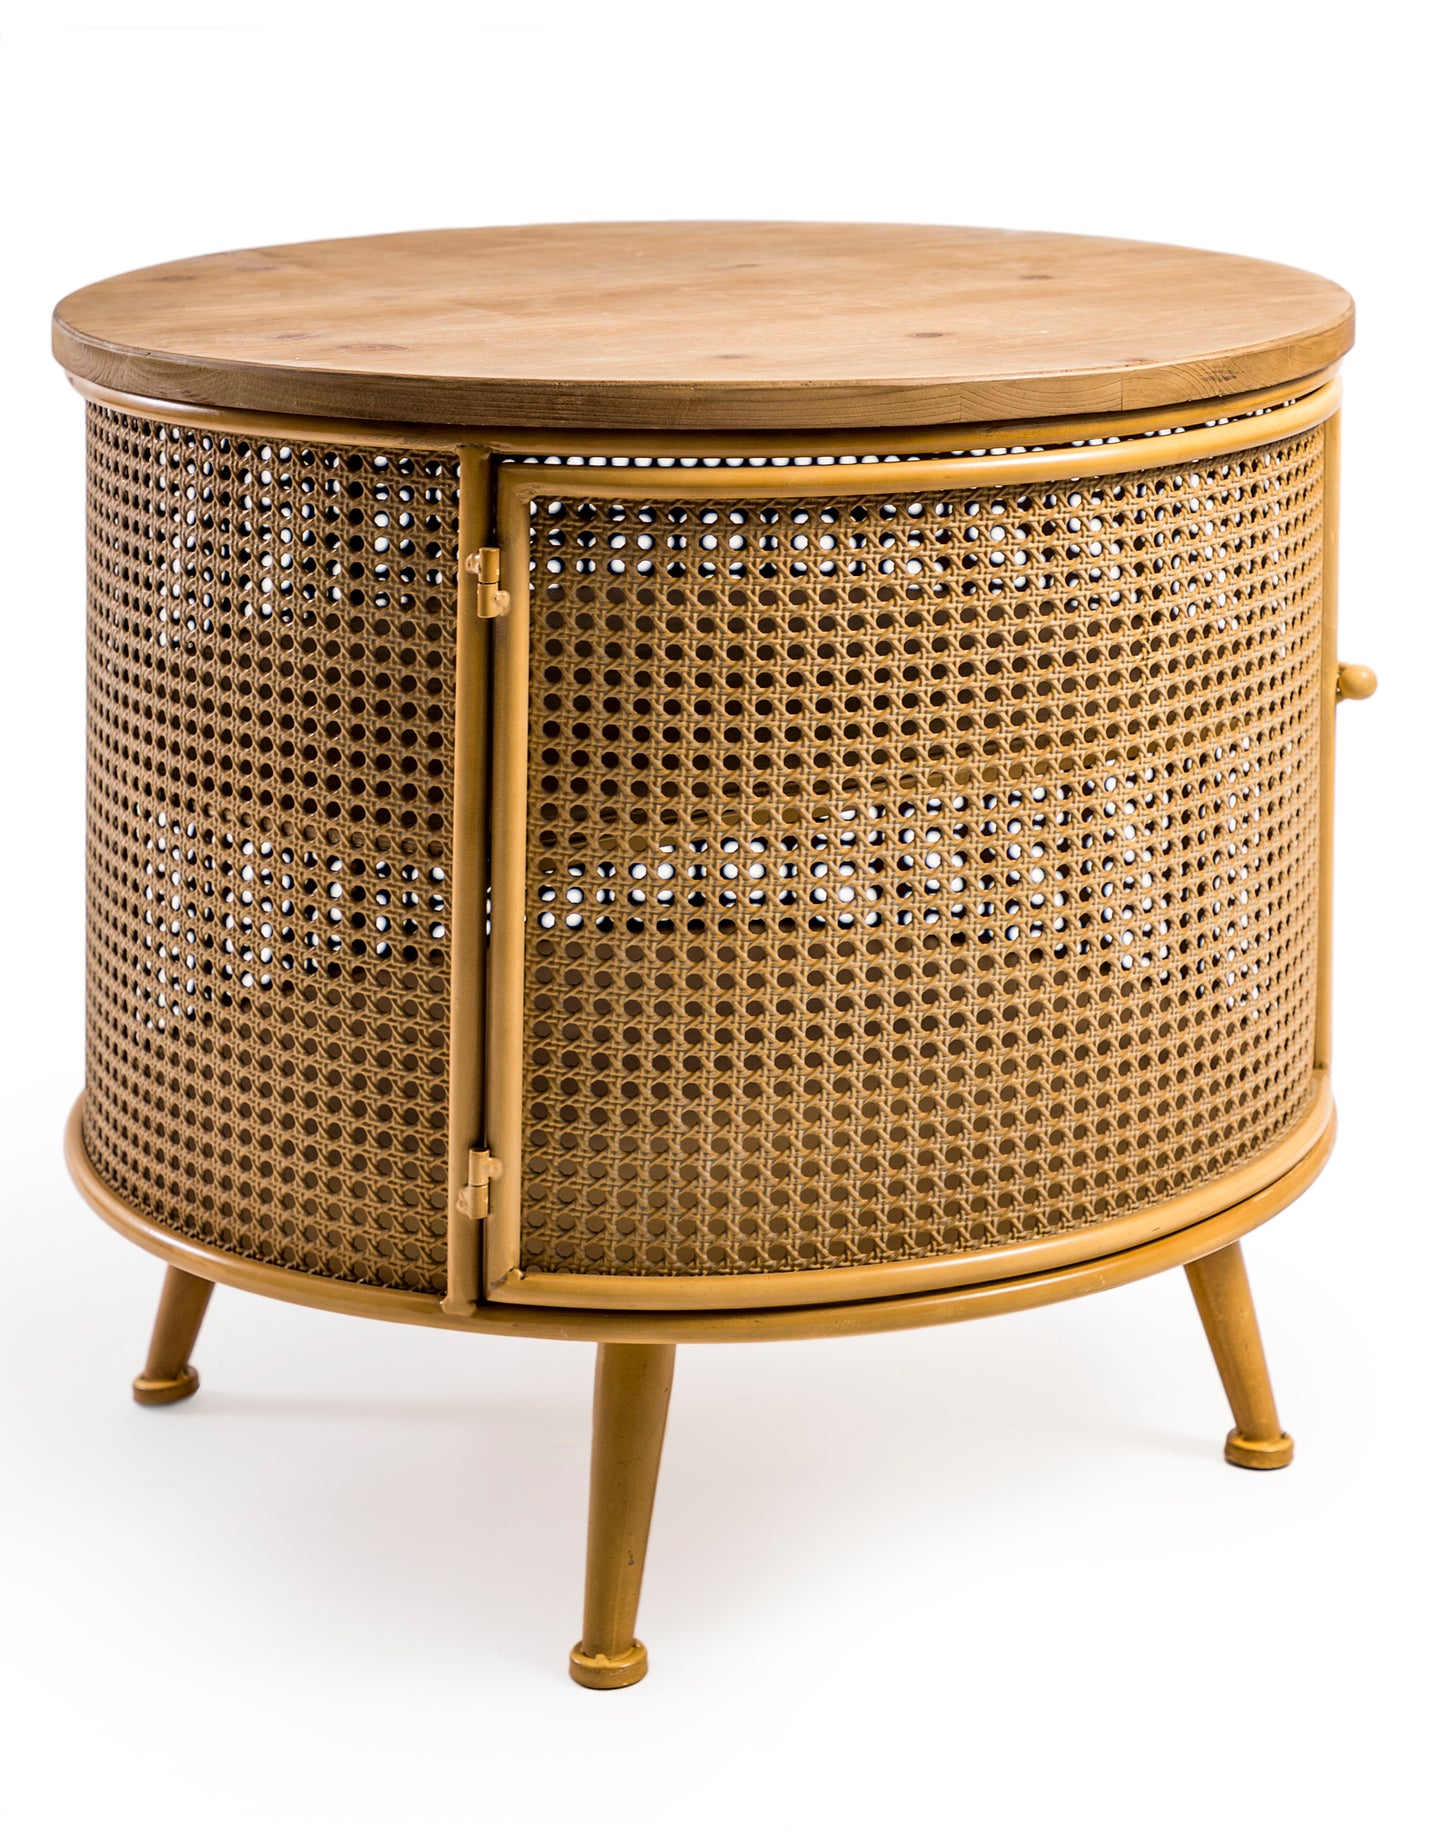 Rustic Metal Rattan and Wood Retro Round Side Cabinet